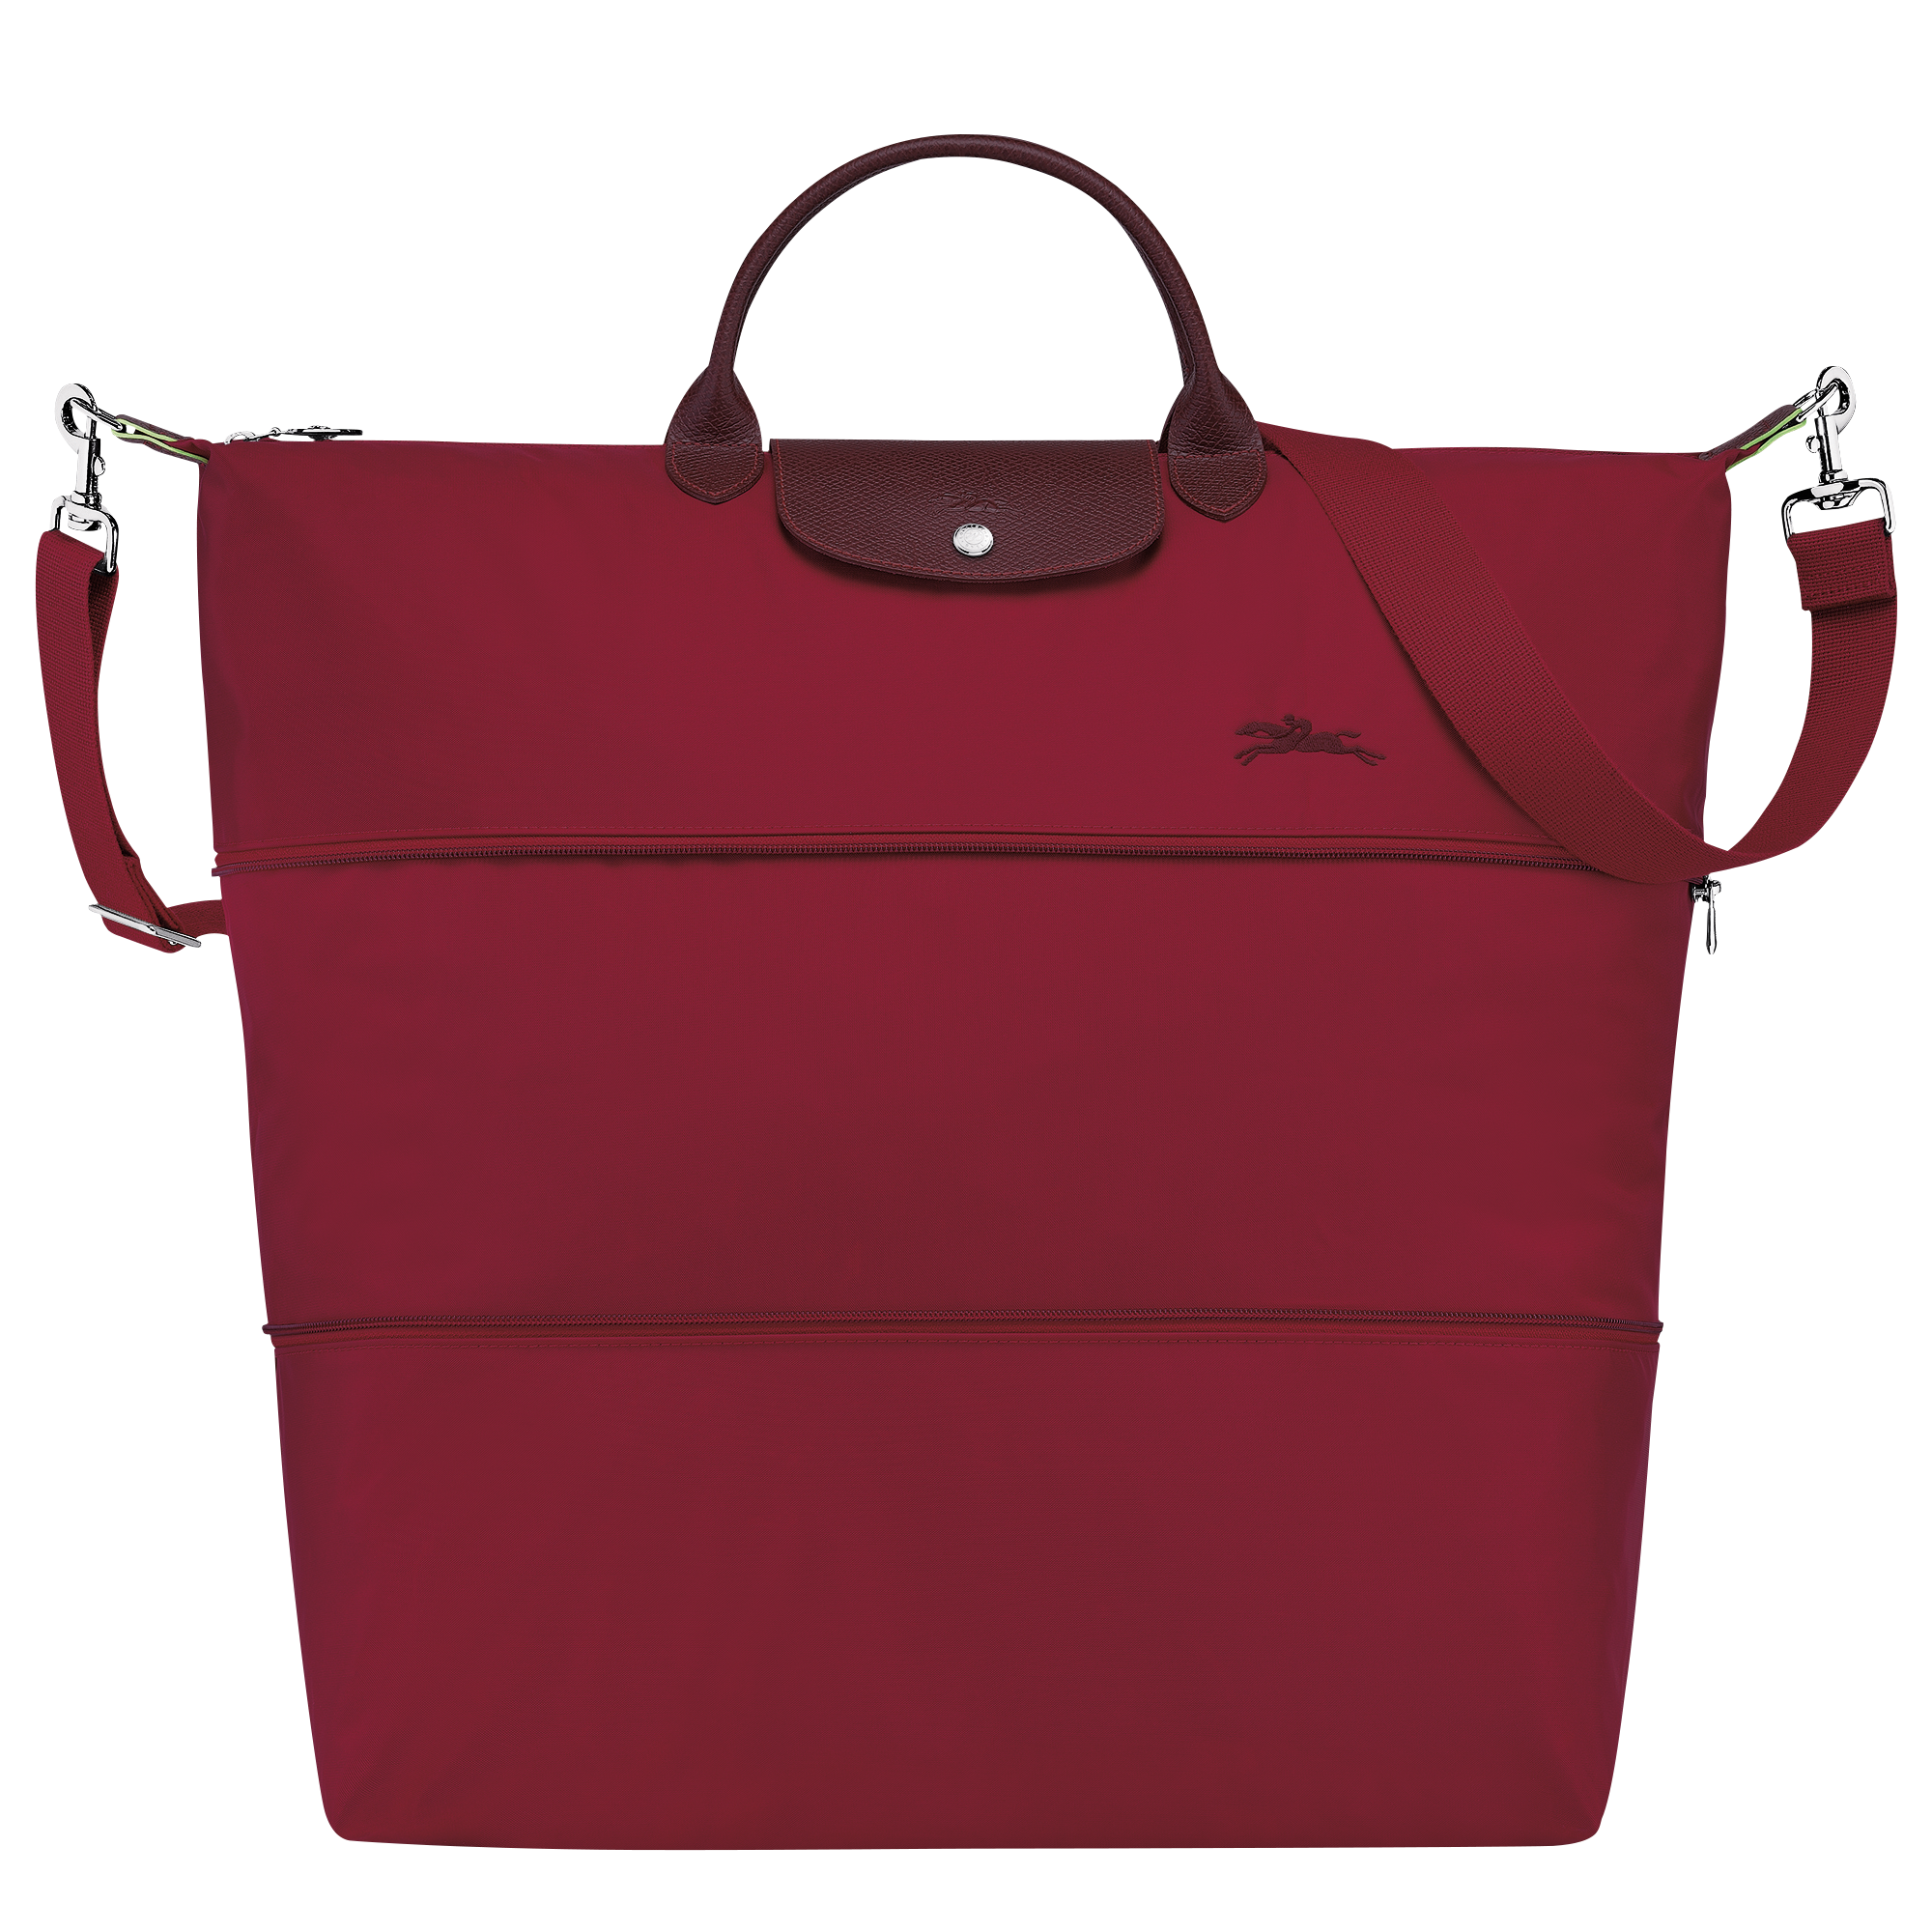 Dealmoon Exclusive: Gilt Longchamp Bags Sale Up to 50% off+extra 15% off